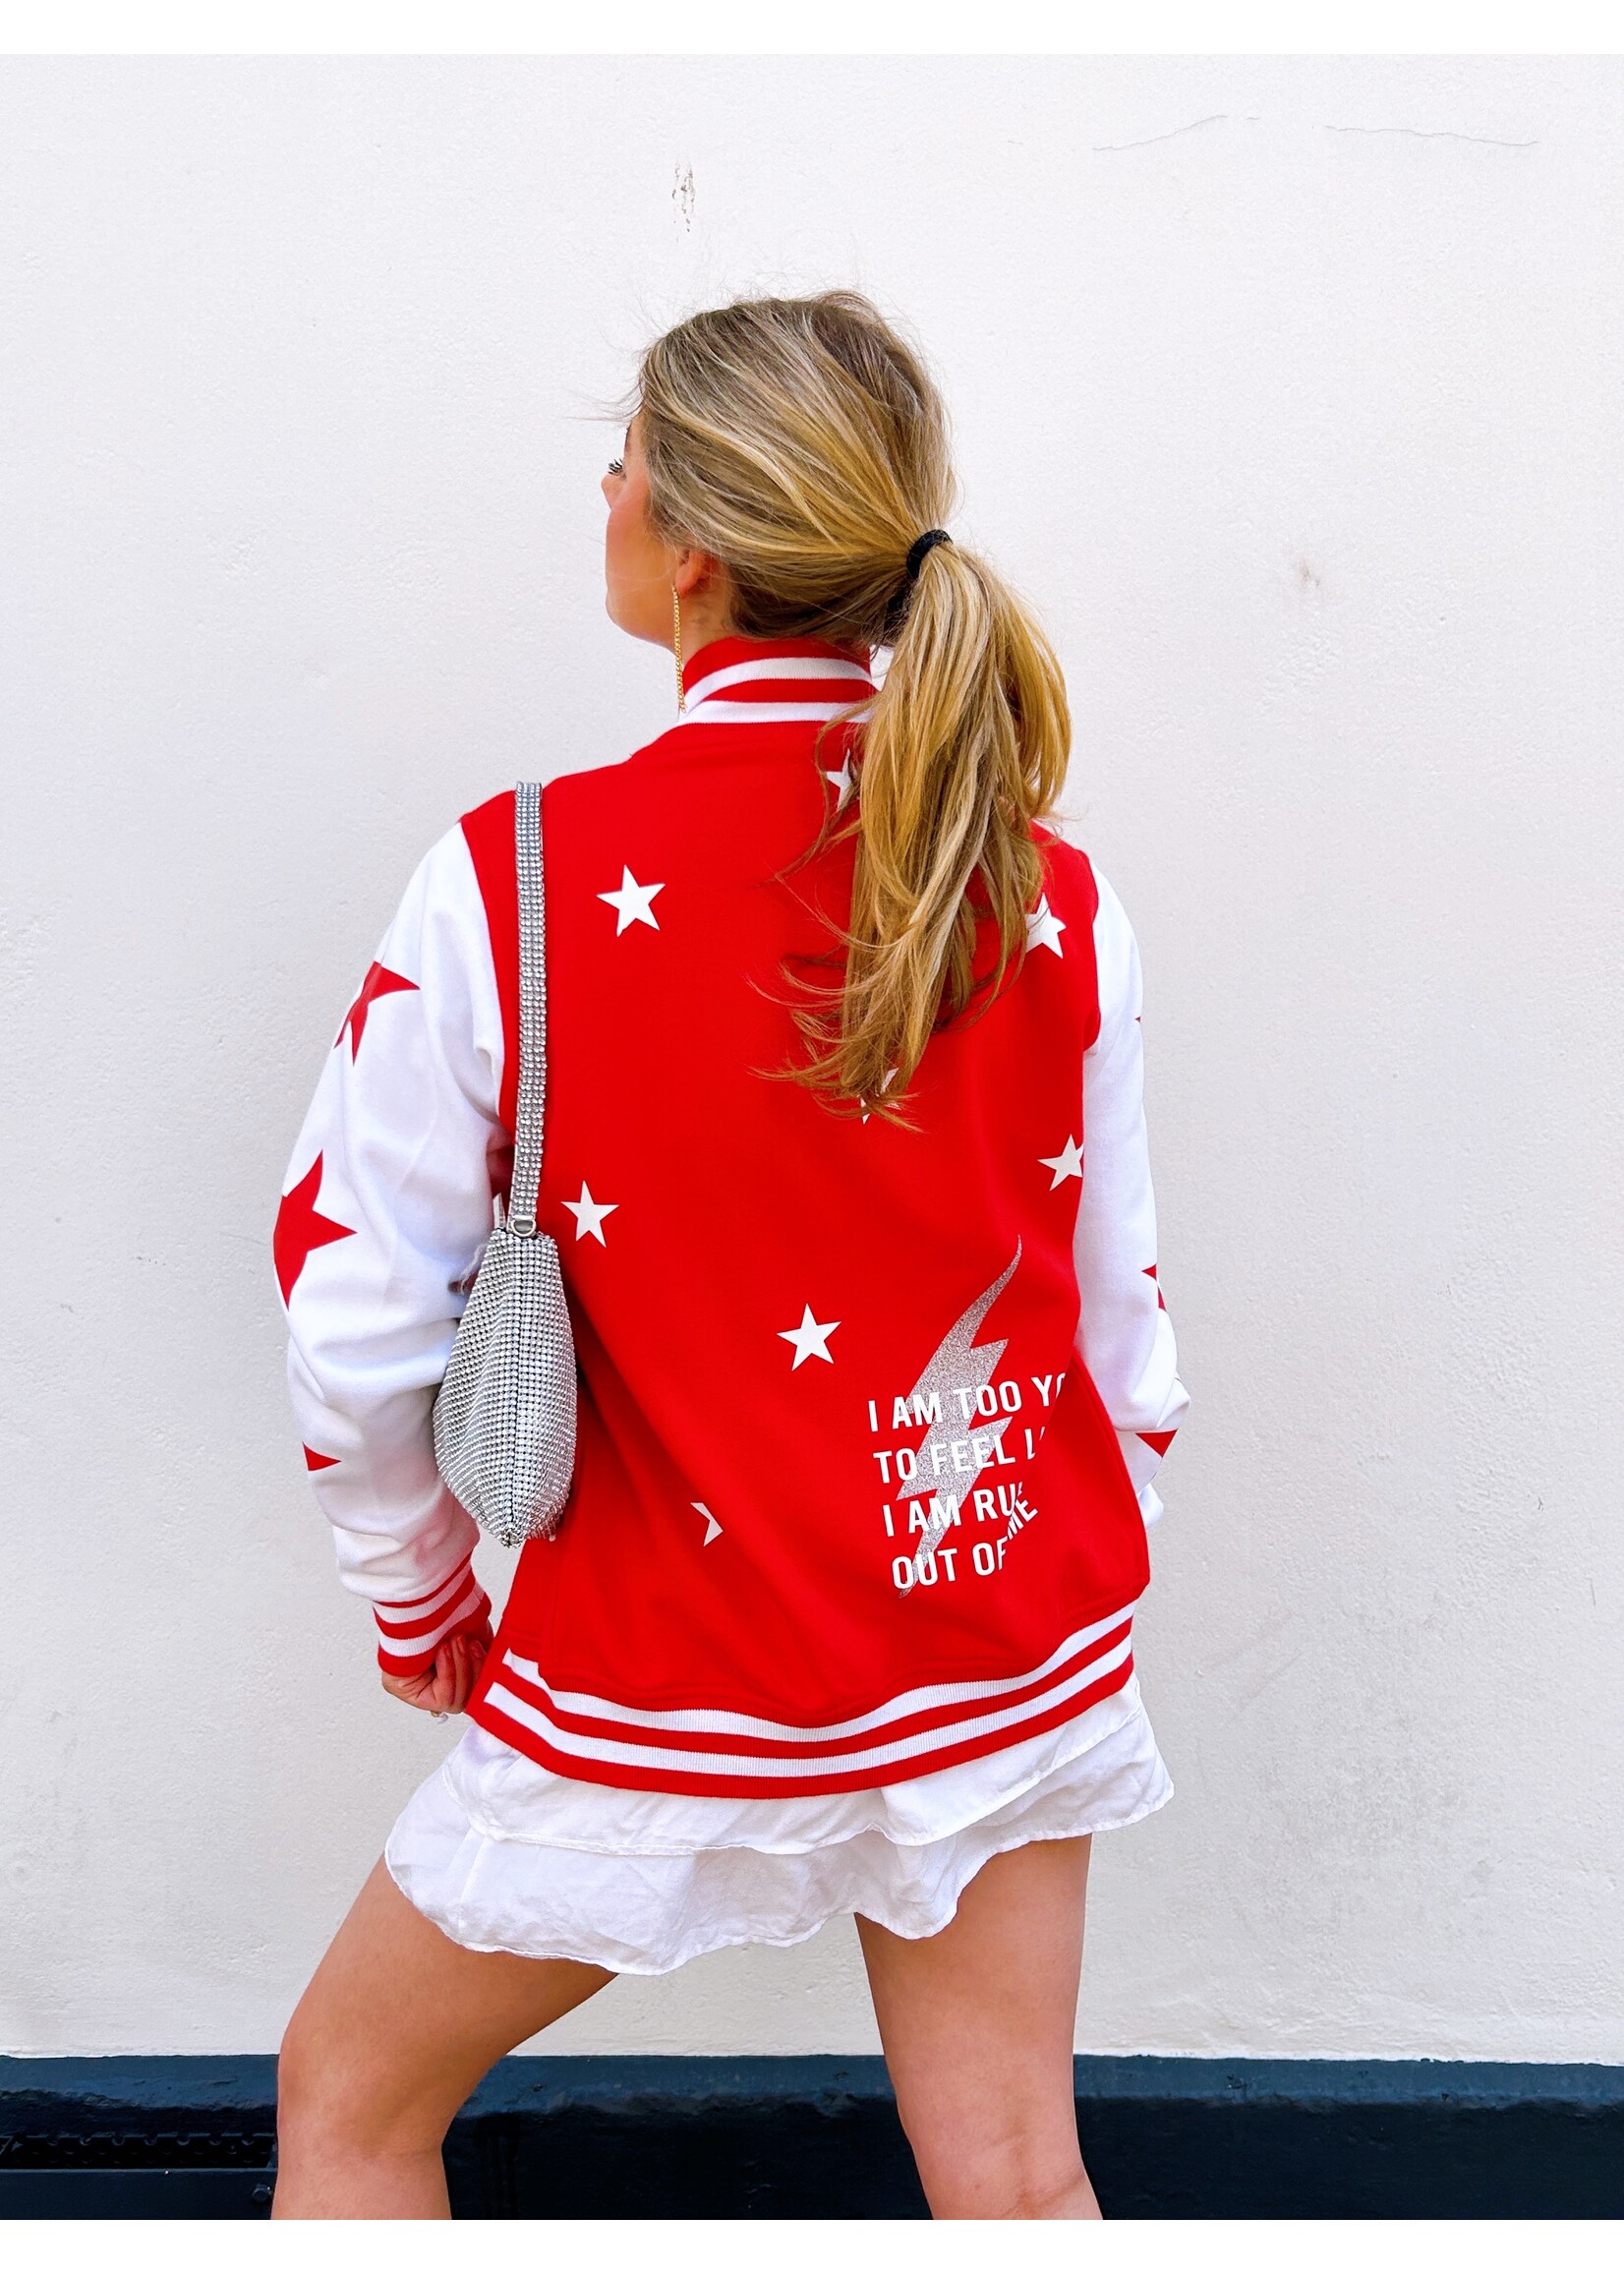 YOU ARE SPECIAL "I am too young" stars baseball jacket